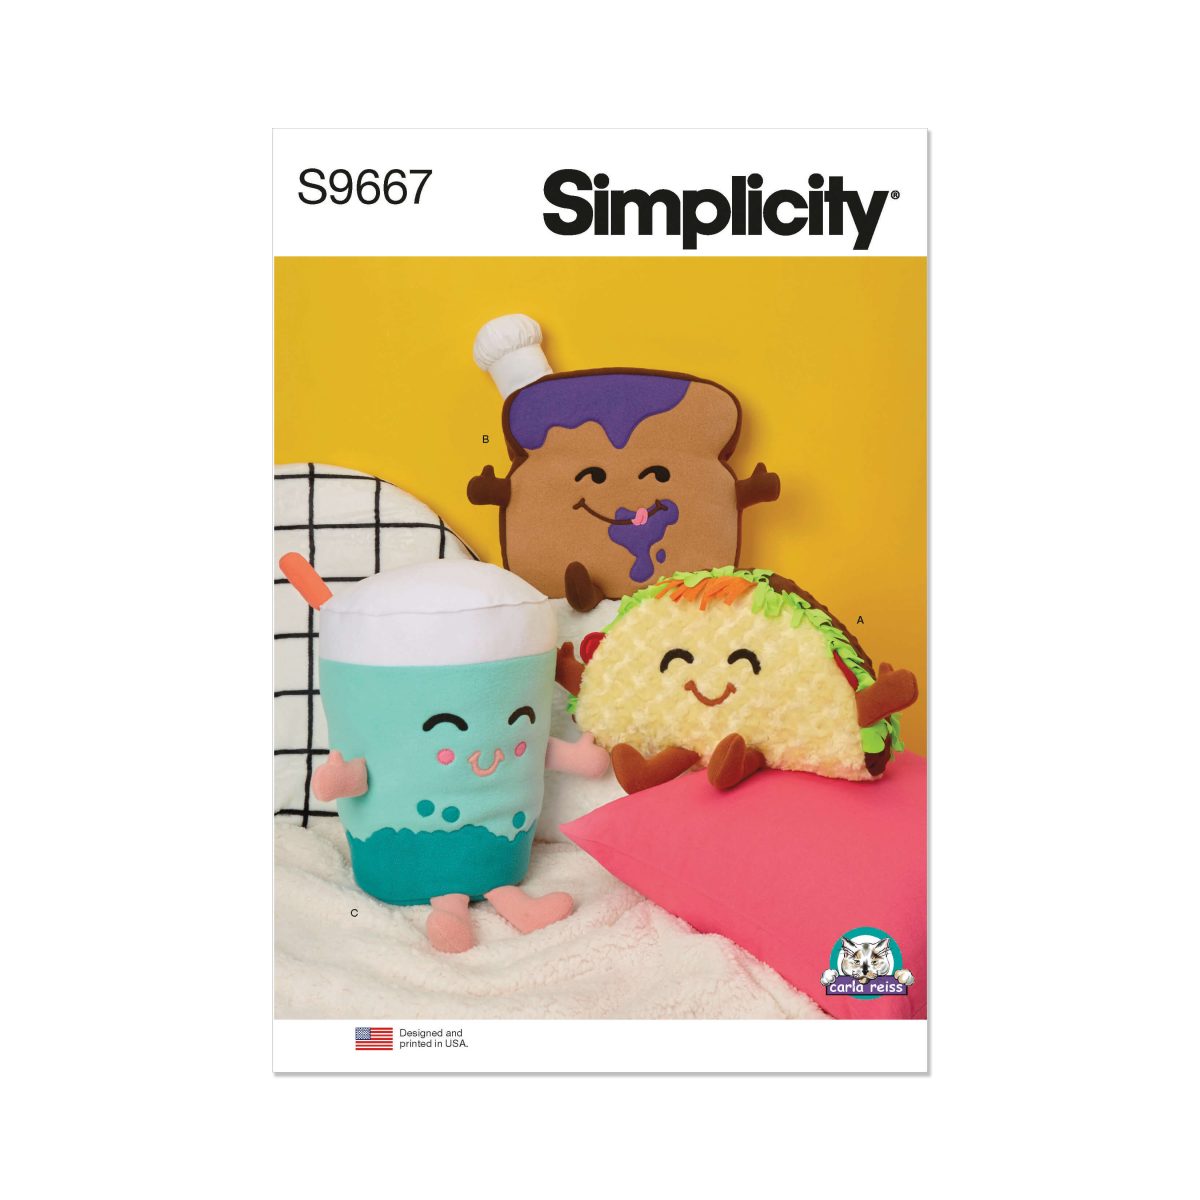 Simplicity Sewing Pattern S9667 Plush Taco, Toast and Bubble Tea by Carla Reiss